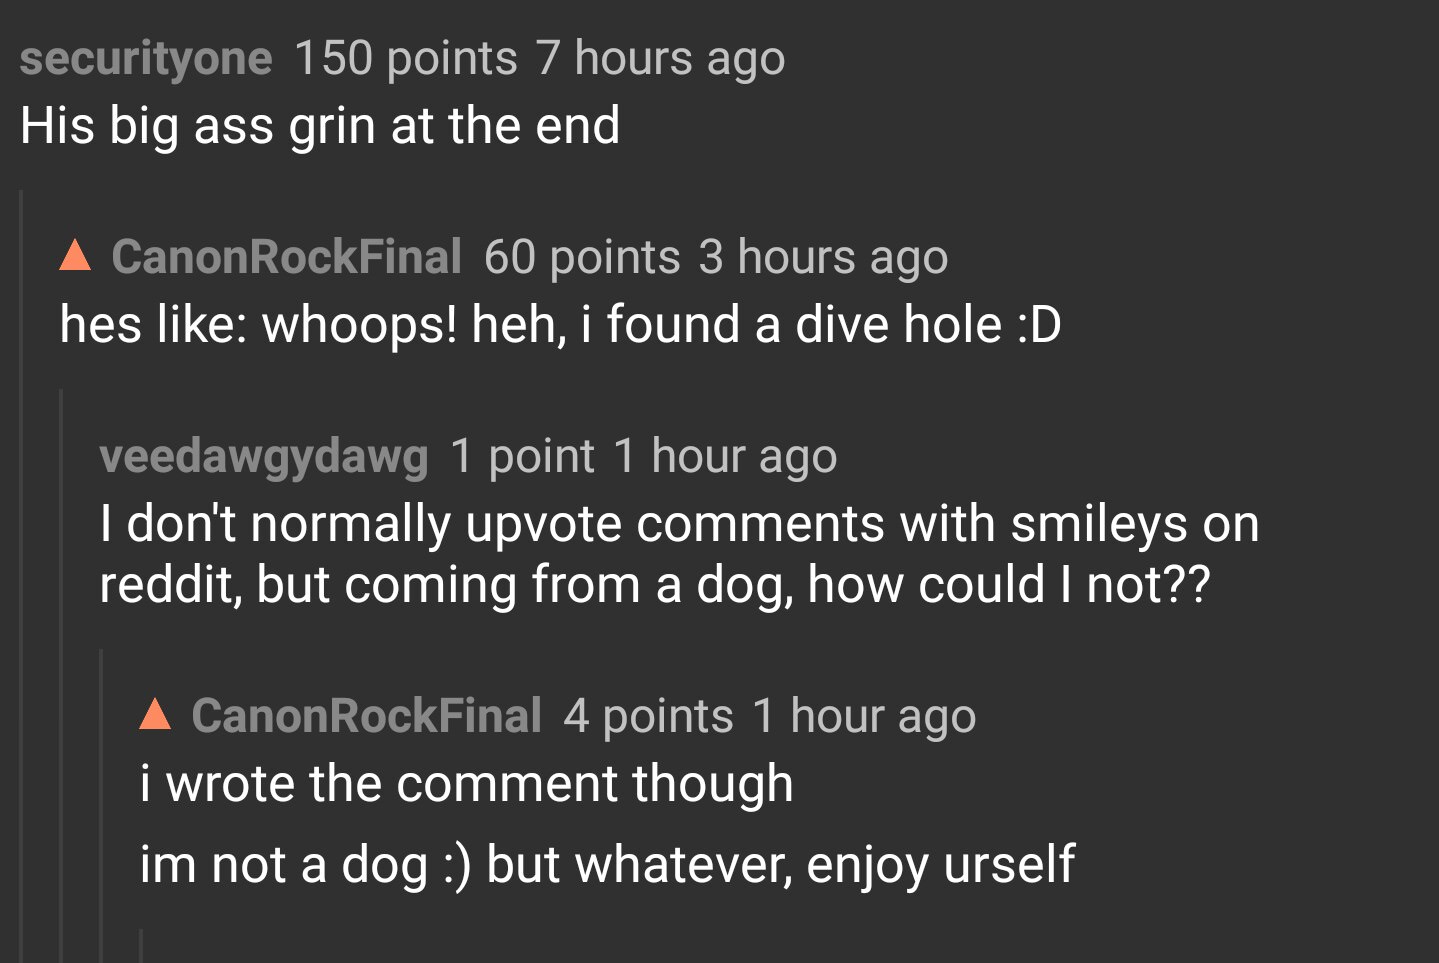 angle - securityone 150 points 7 hours ago His big ass grin at the end A CanonRockFinal 60 points 3 hours ago hes whoops! heh, i found a dive hole D veedawgydawg 1 point 1 hour ago I don't normally upvote with smileys on reddit, but coming from a dog, how